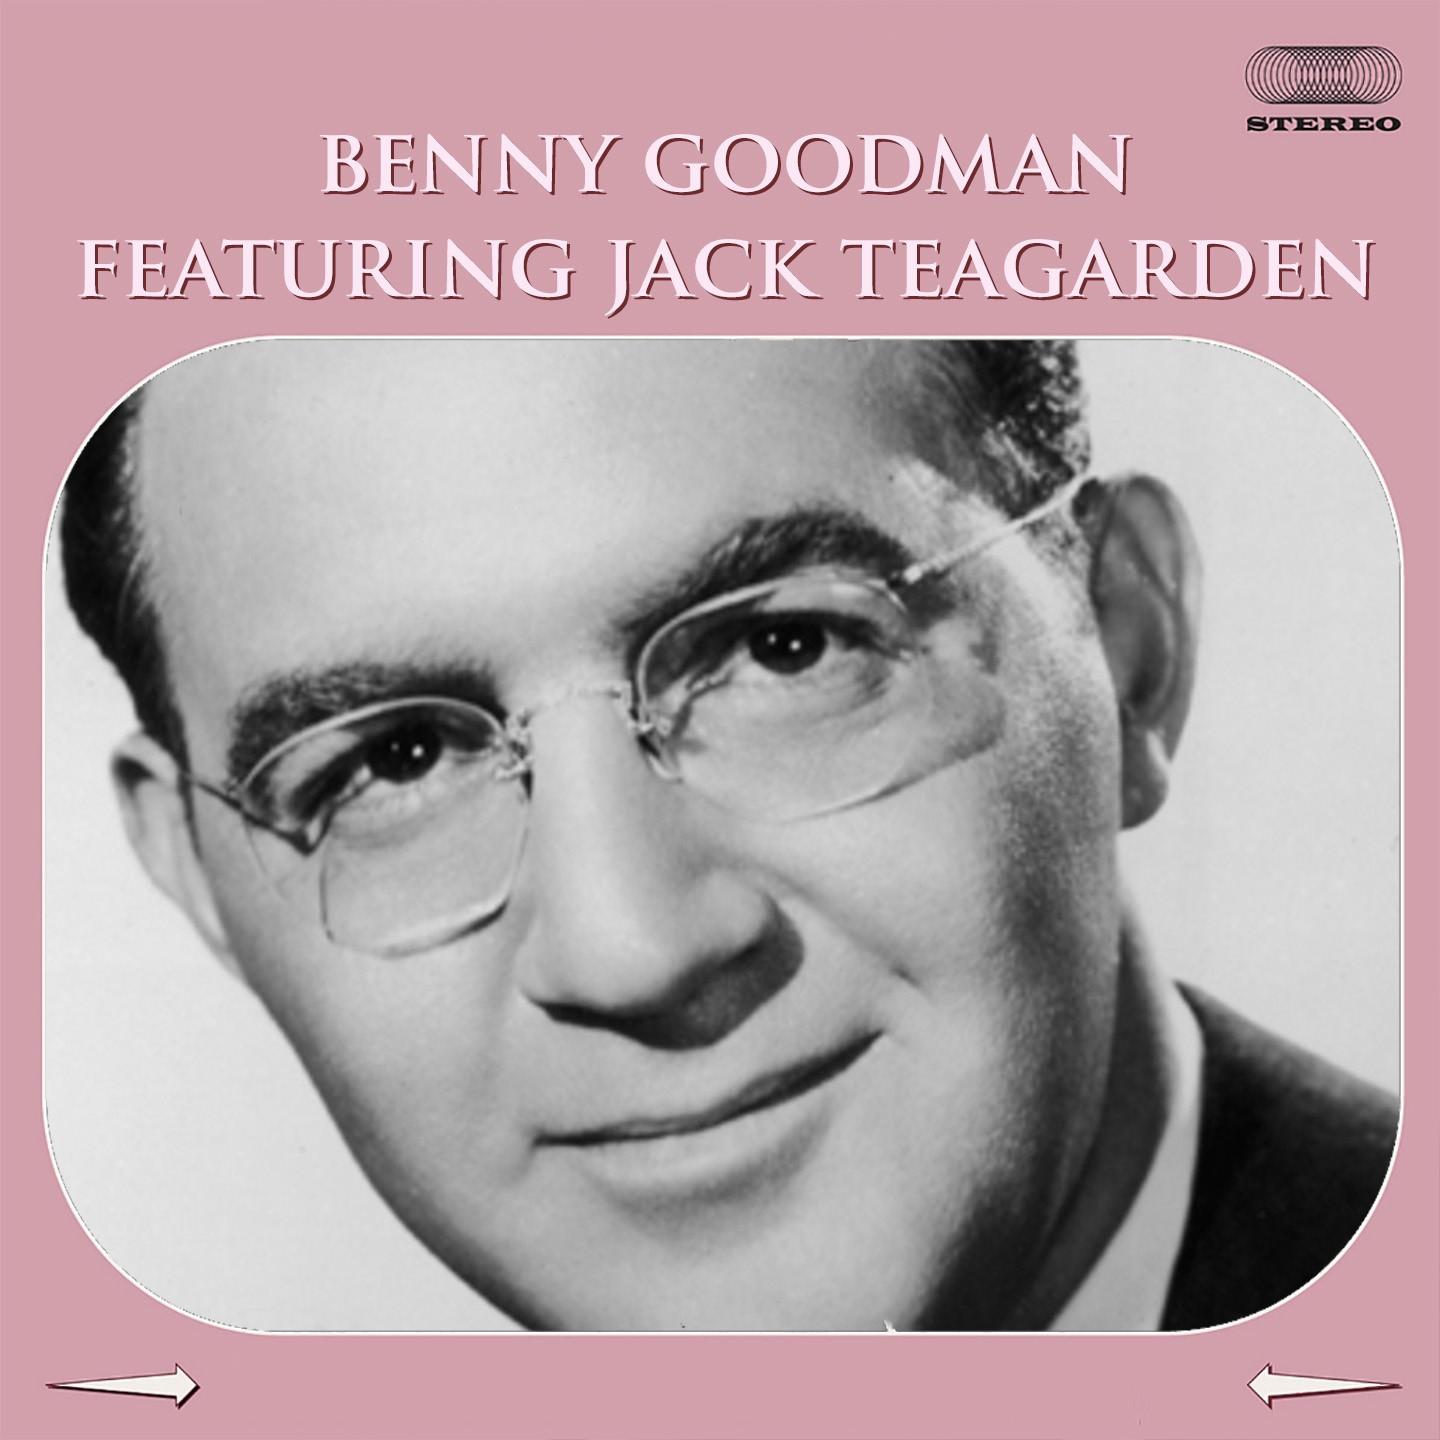 Benny Goodman Featuring Jack Teagarden Medley: I Gotta Right to Sing the Blues / Ain´tcha Glad / Texas Tea Party / Dr. Heckle and Mr. Jibe / Basin Street Blues / Beale Street Blues / Moonglow / As Long as I Live